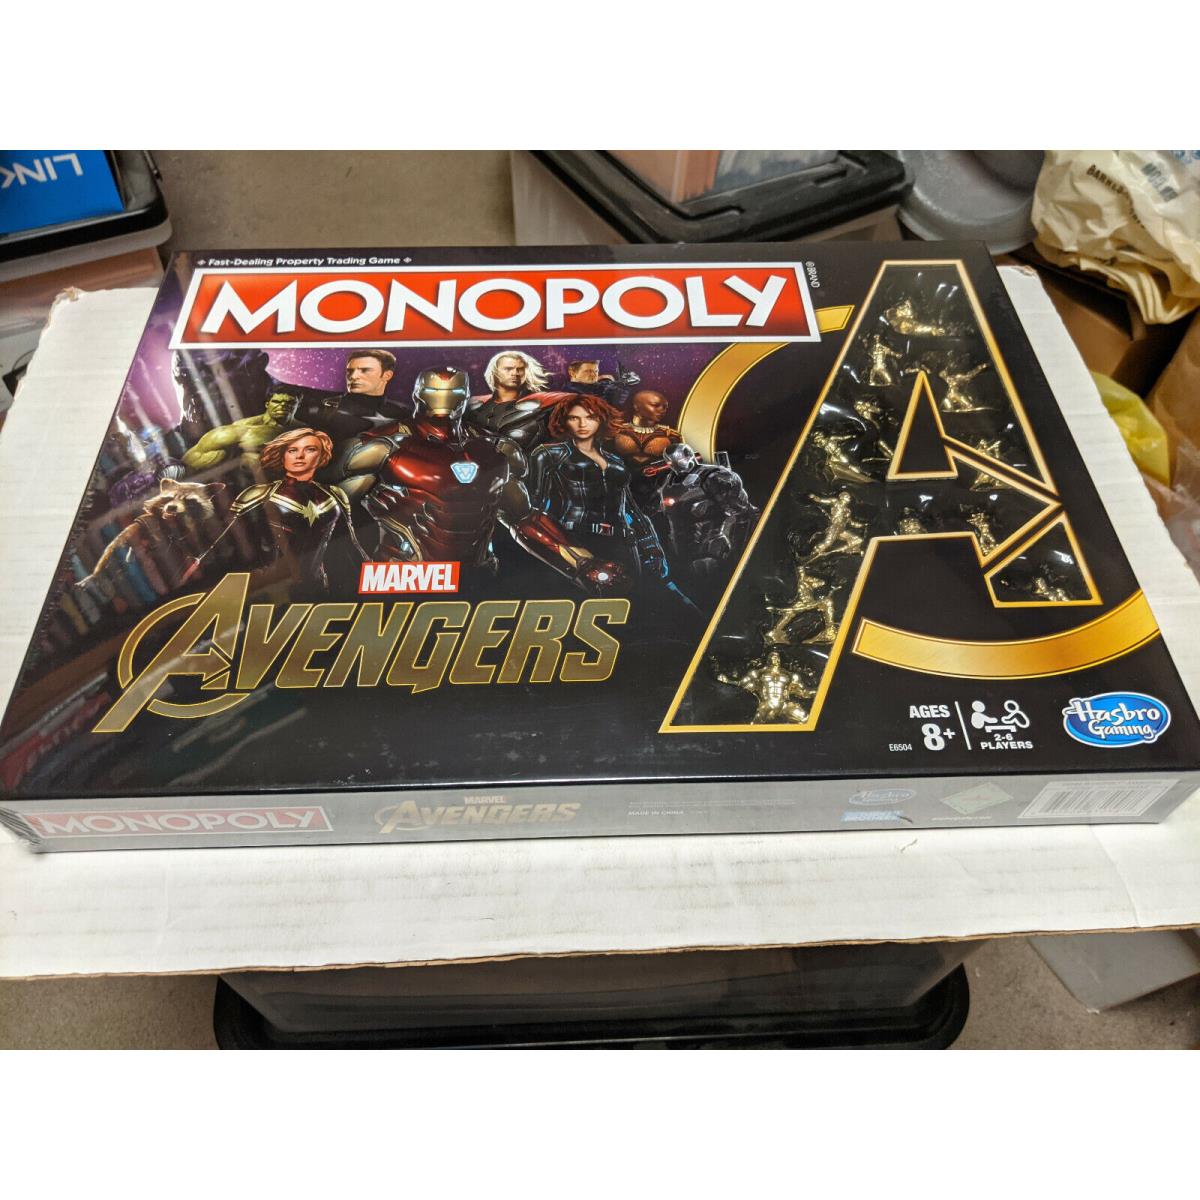 Monopoly: Avengers Endgame Special Edition Board Game